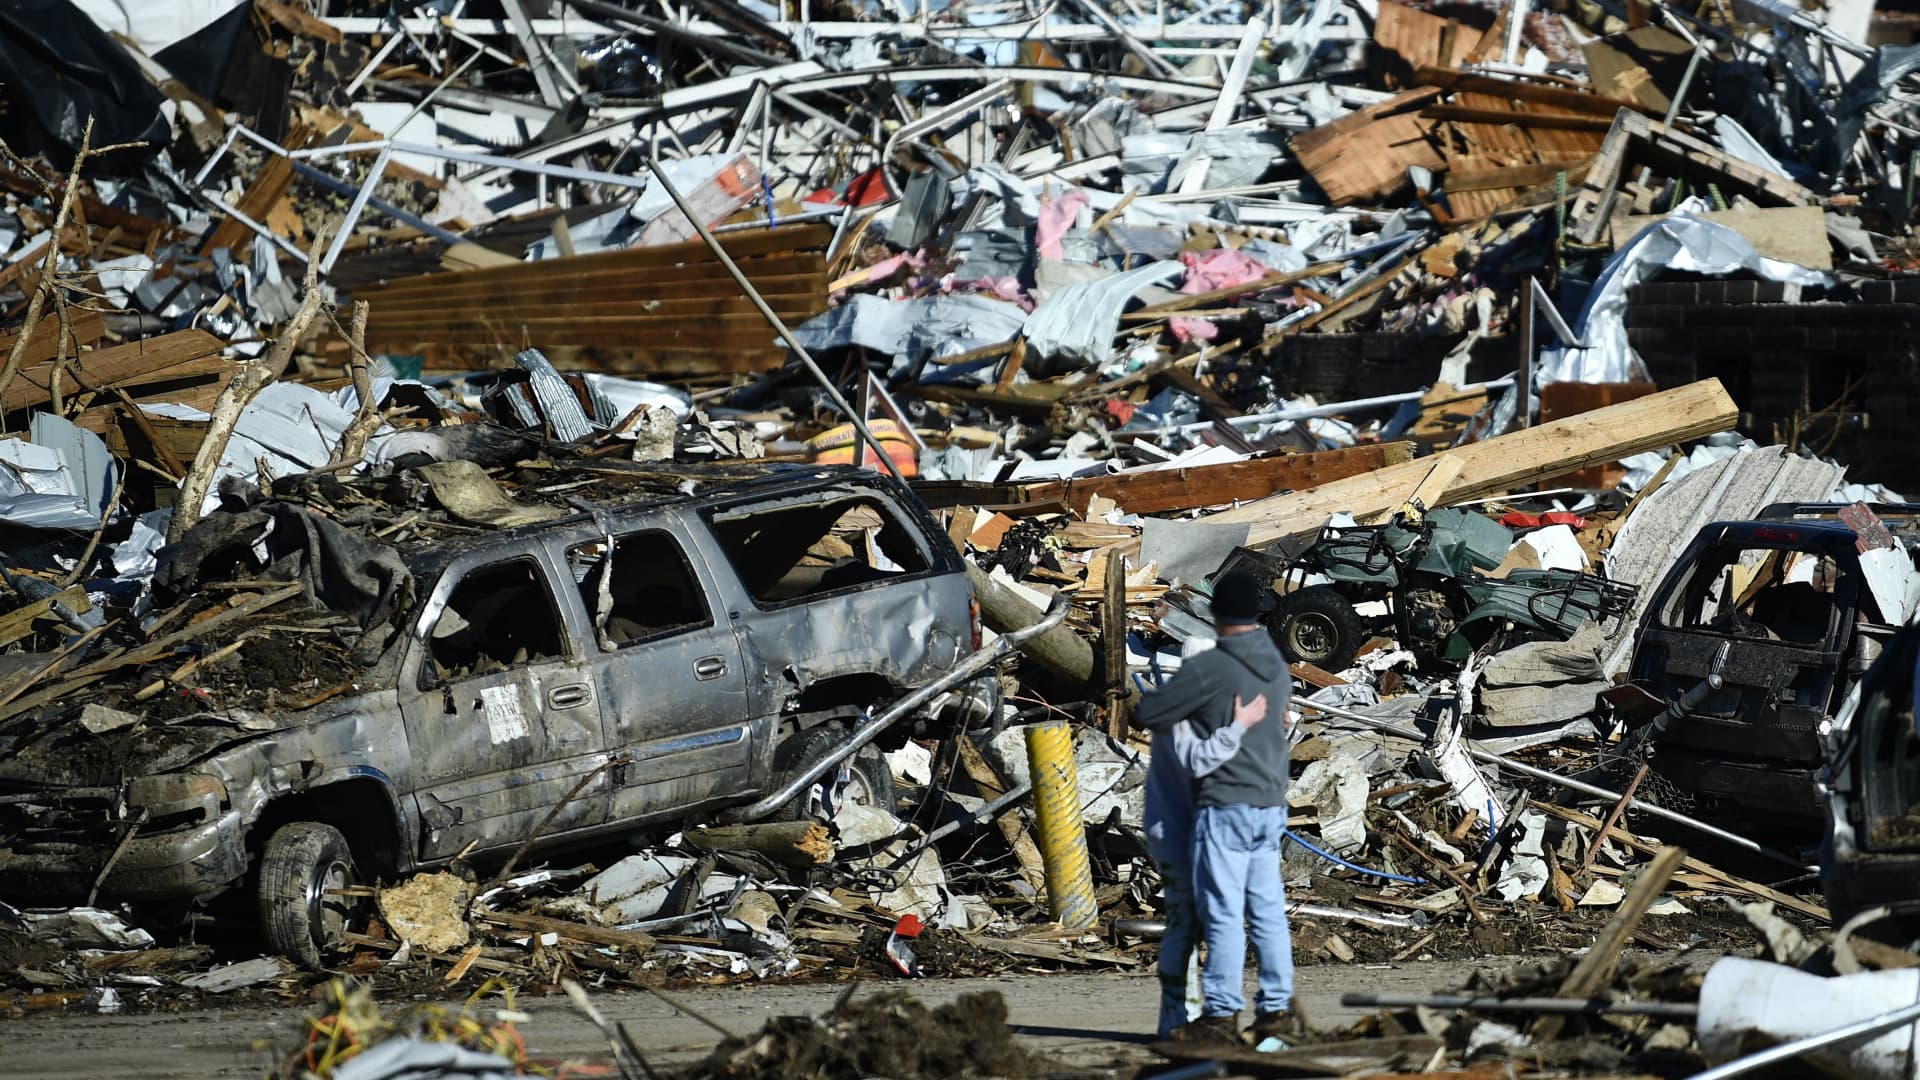 People embrace as tornado damage is seen after extreme weather hit the region December 12, 2021, in Mayfield, Kentucky.